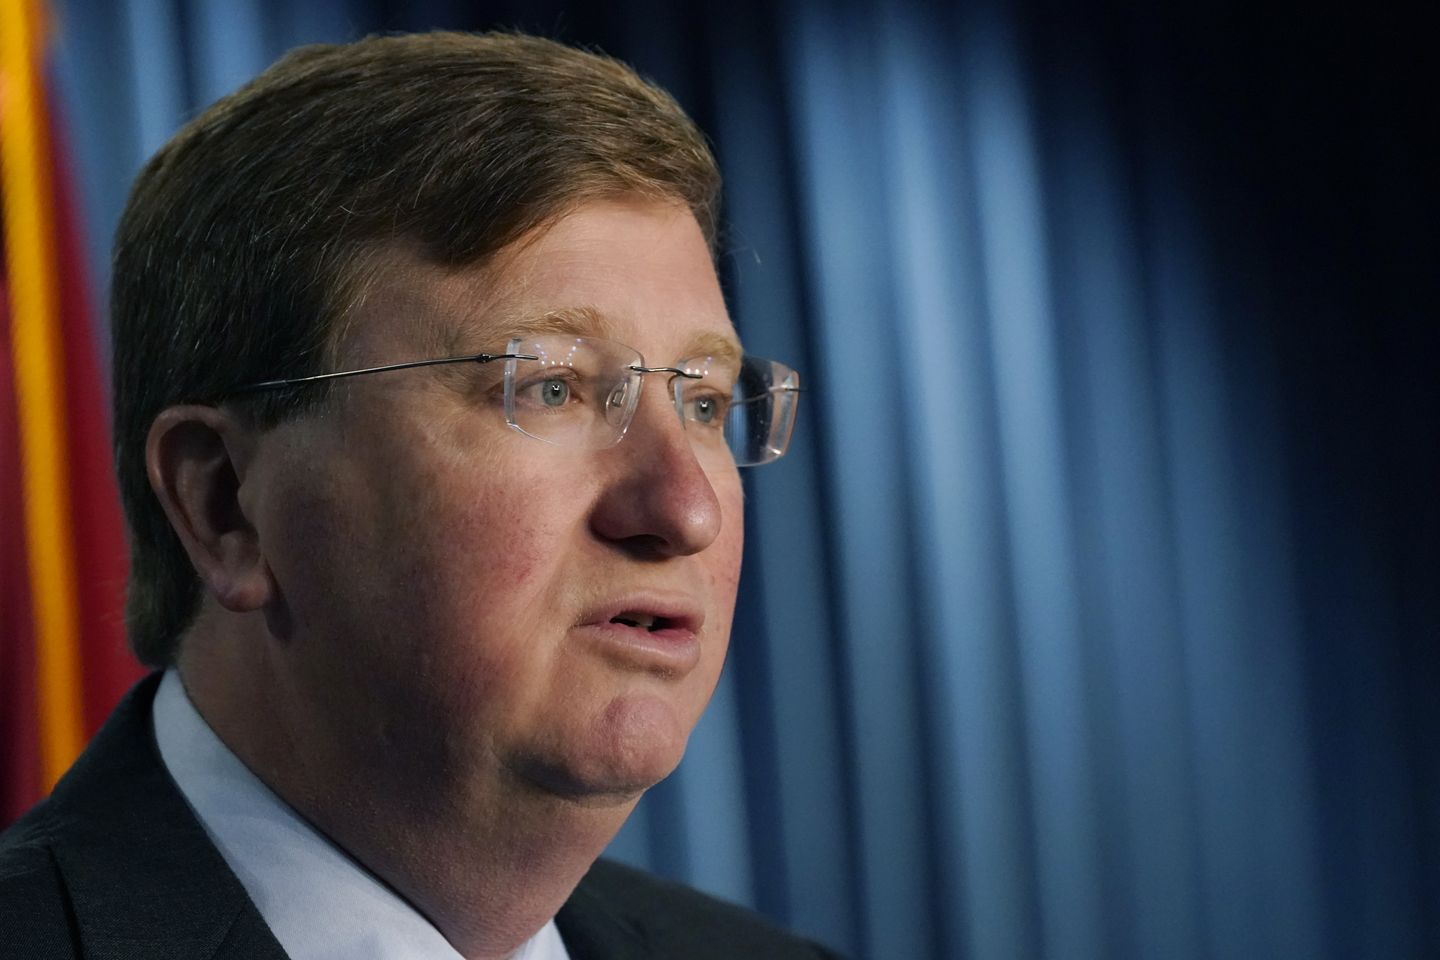 Gov. Tate Reeves looks ahead to 'post-Roe Mississippi' by expanding health care, adoption services